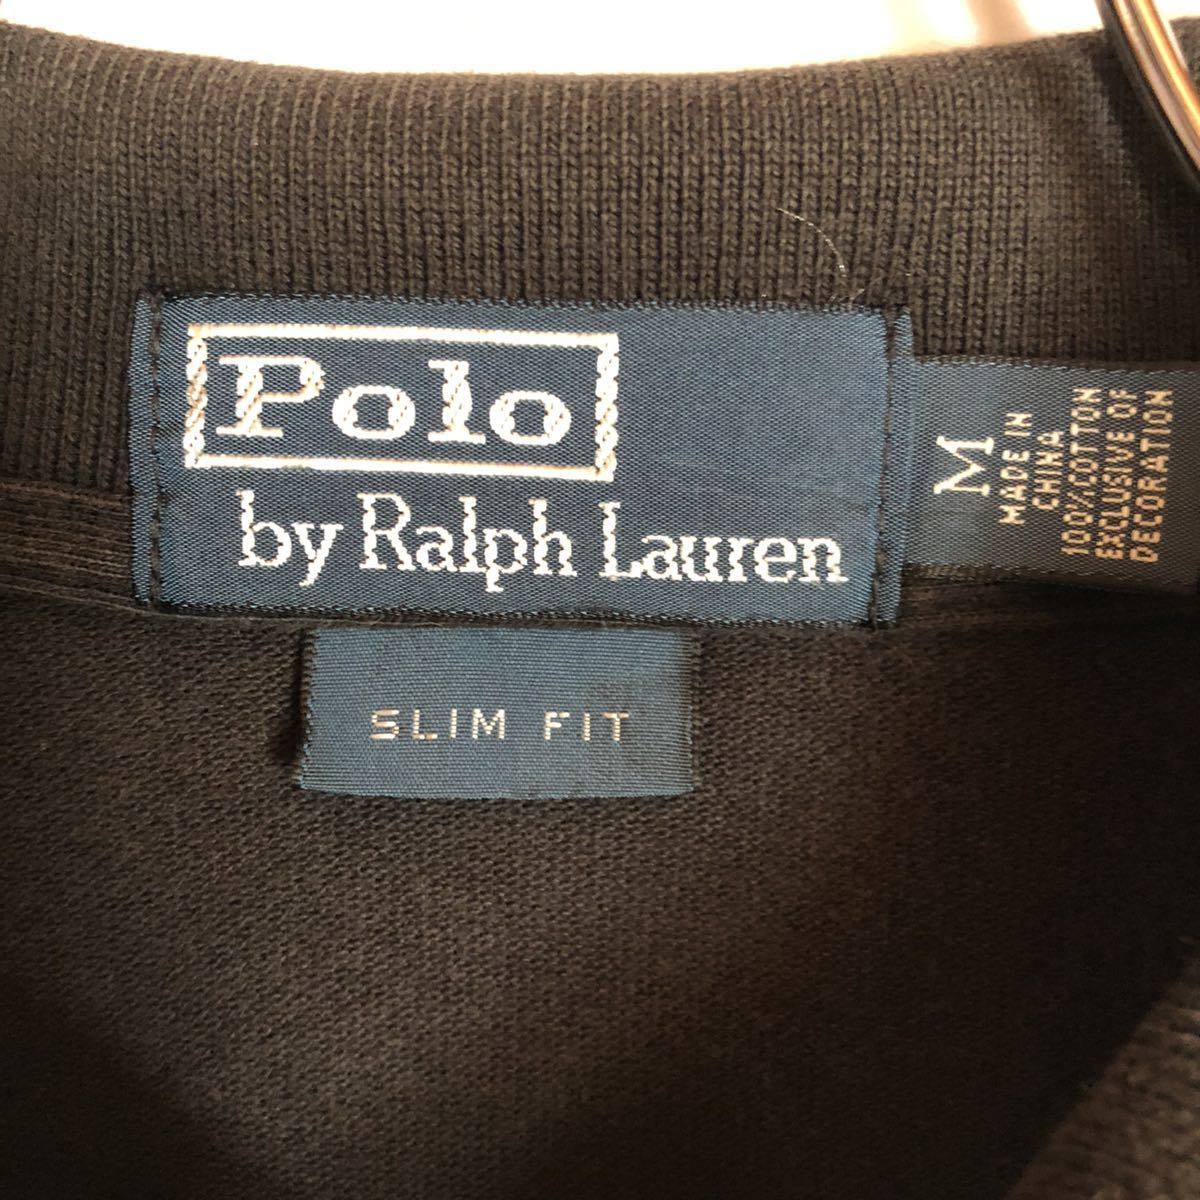 POLO Ralph Lauren Polo Ralph Lauren polo-shirt with short sleeves big po knee embroidery black badge lady's M size [AY0166]